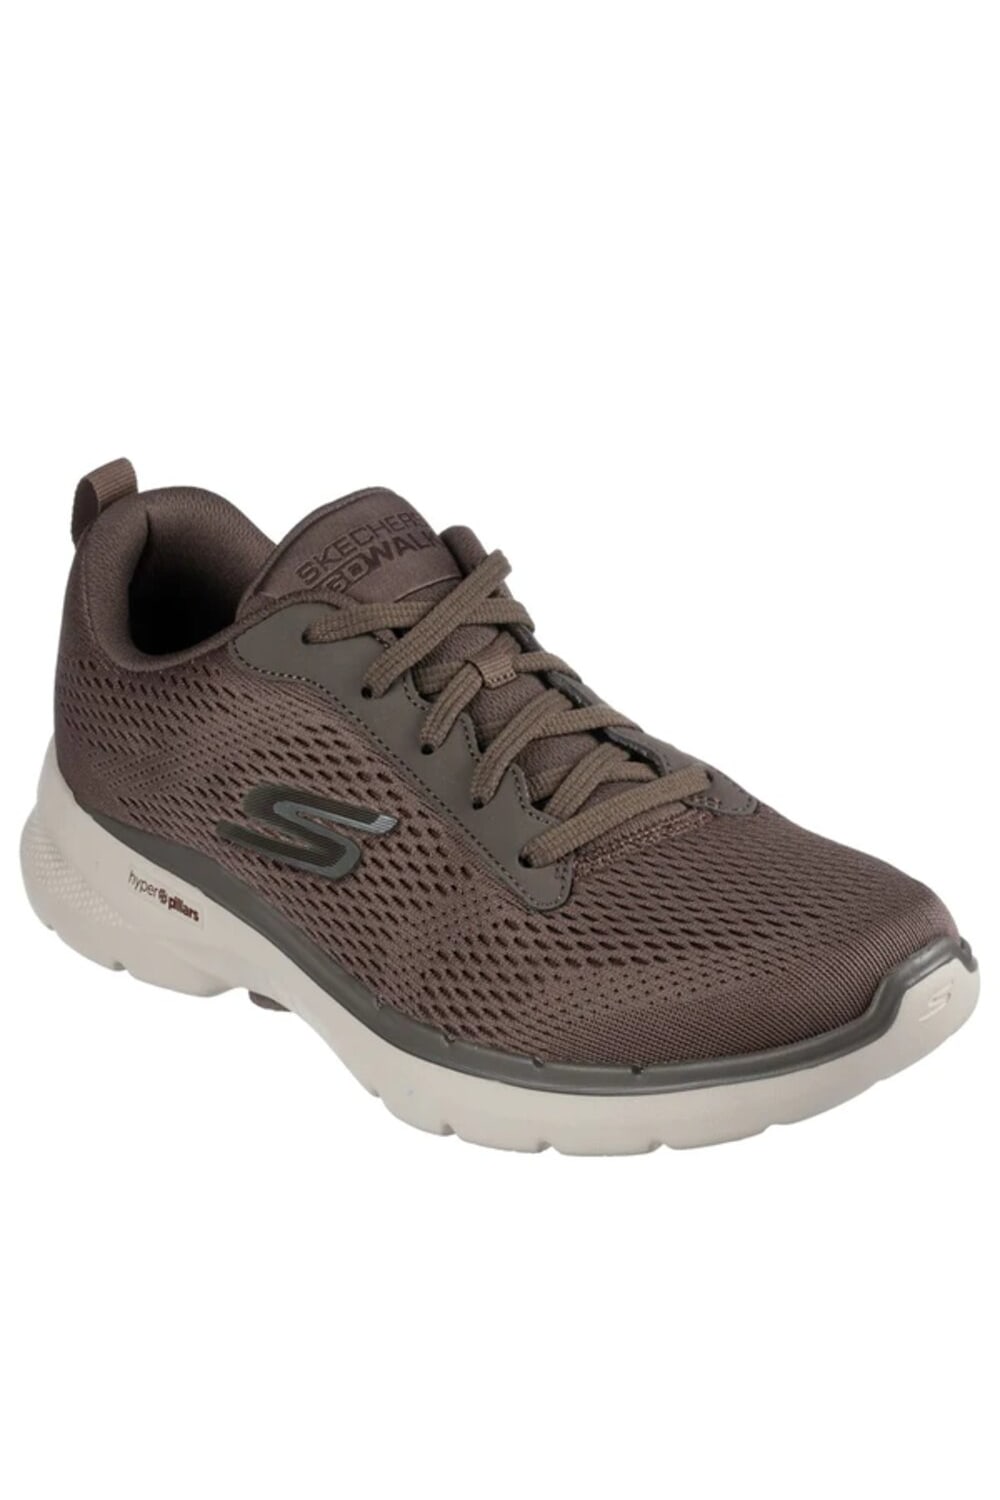 Mens Go Walk 6 Avalo Sneakers - Taupe